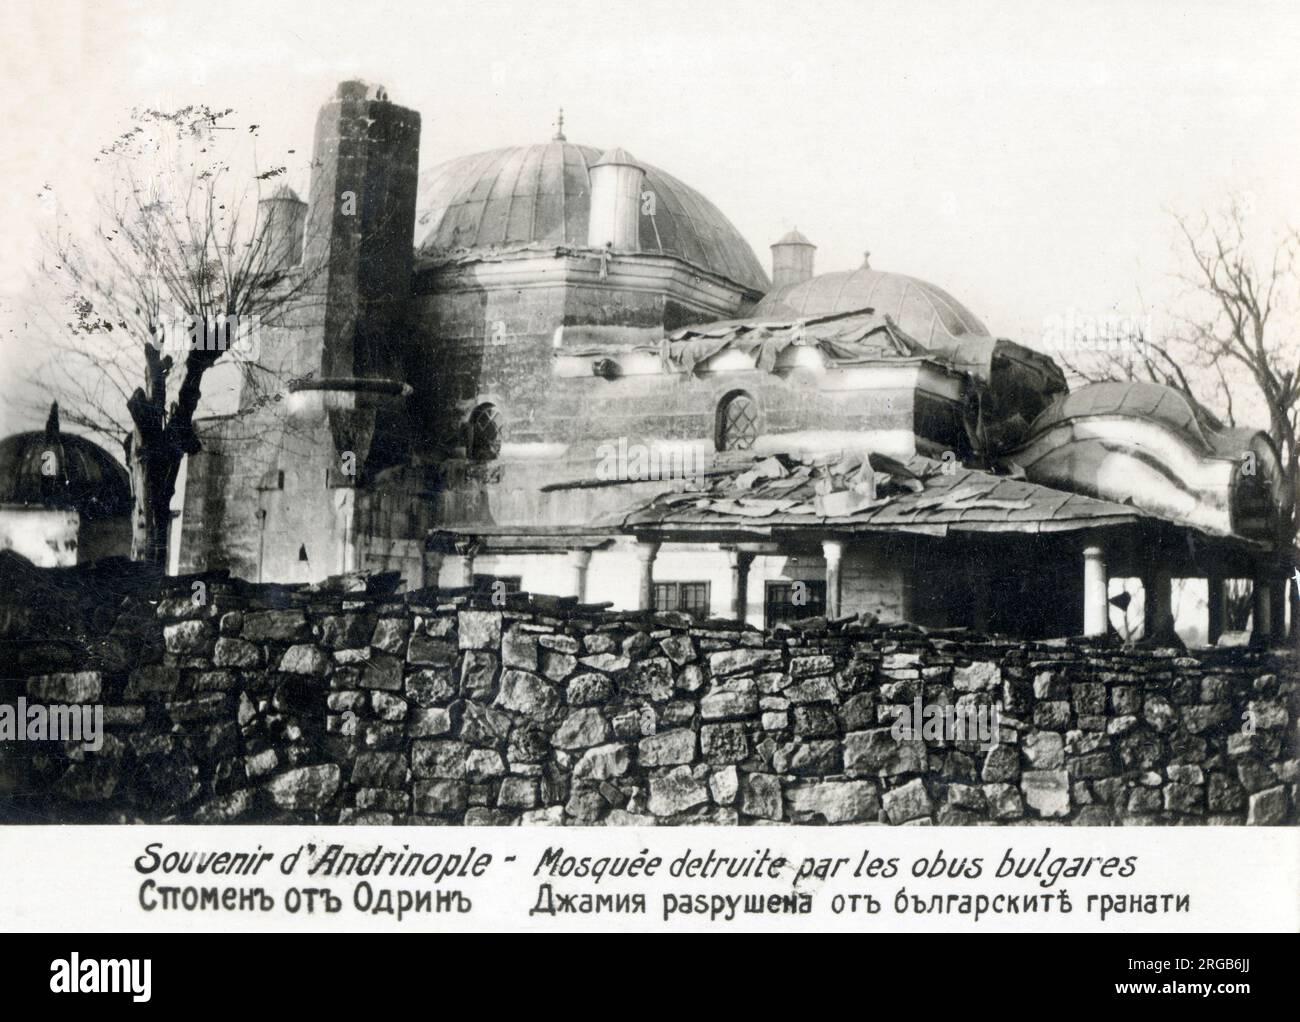 Edirne (Adrianople), Turkey - Mosque damaged in 1913, during the siege of Edirne by the Bulgarian army. The Battle of Adrianople was fought during the First Balkan War, commencing on 3 November 1912 and ending on 26 March 1913 with the capture of Edirne by the Bulgarian 2nd Army and the Serbian 2nd Army. Stock Photo